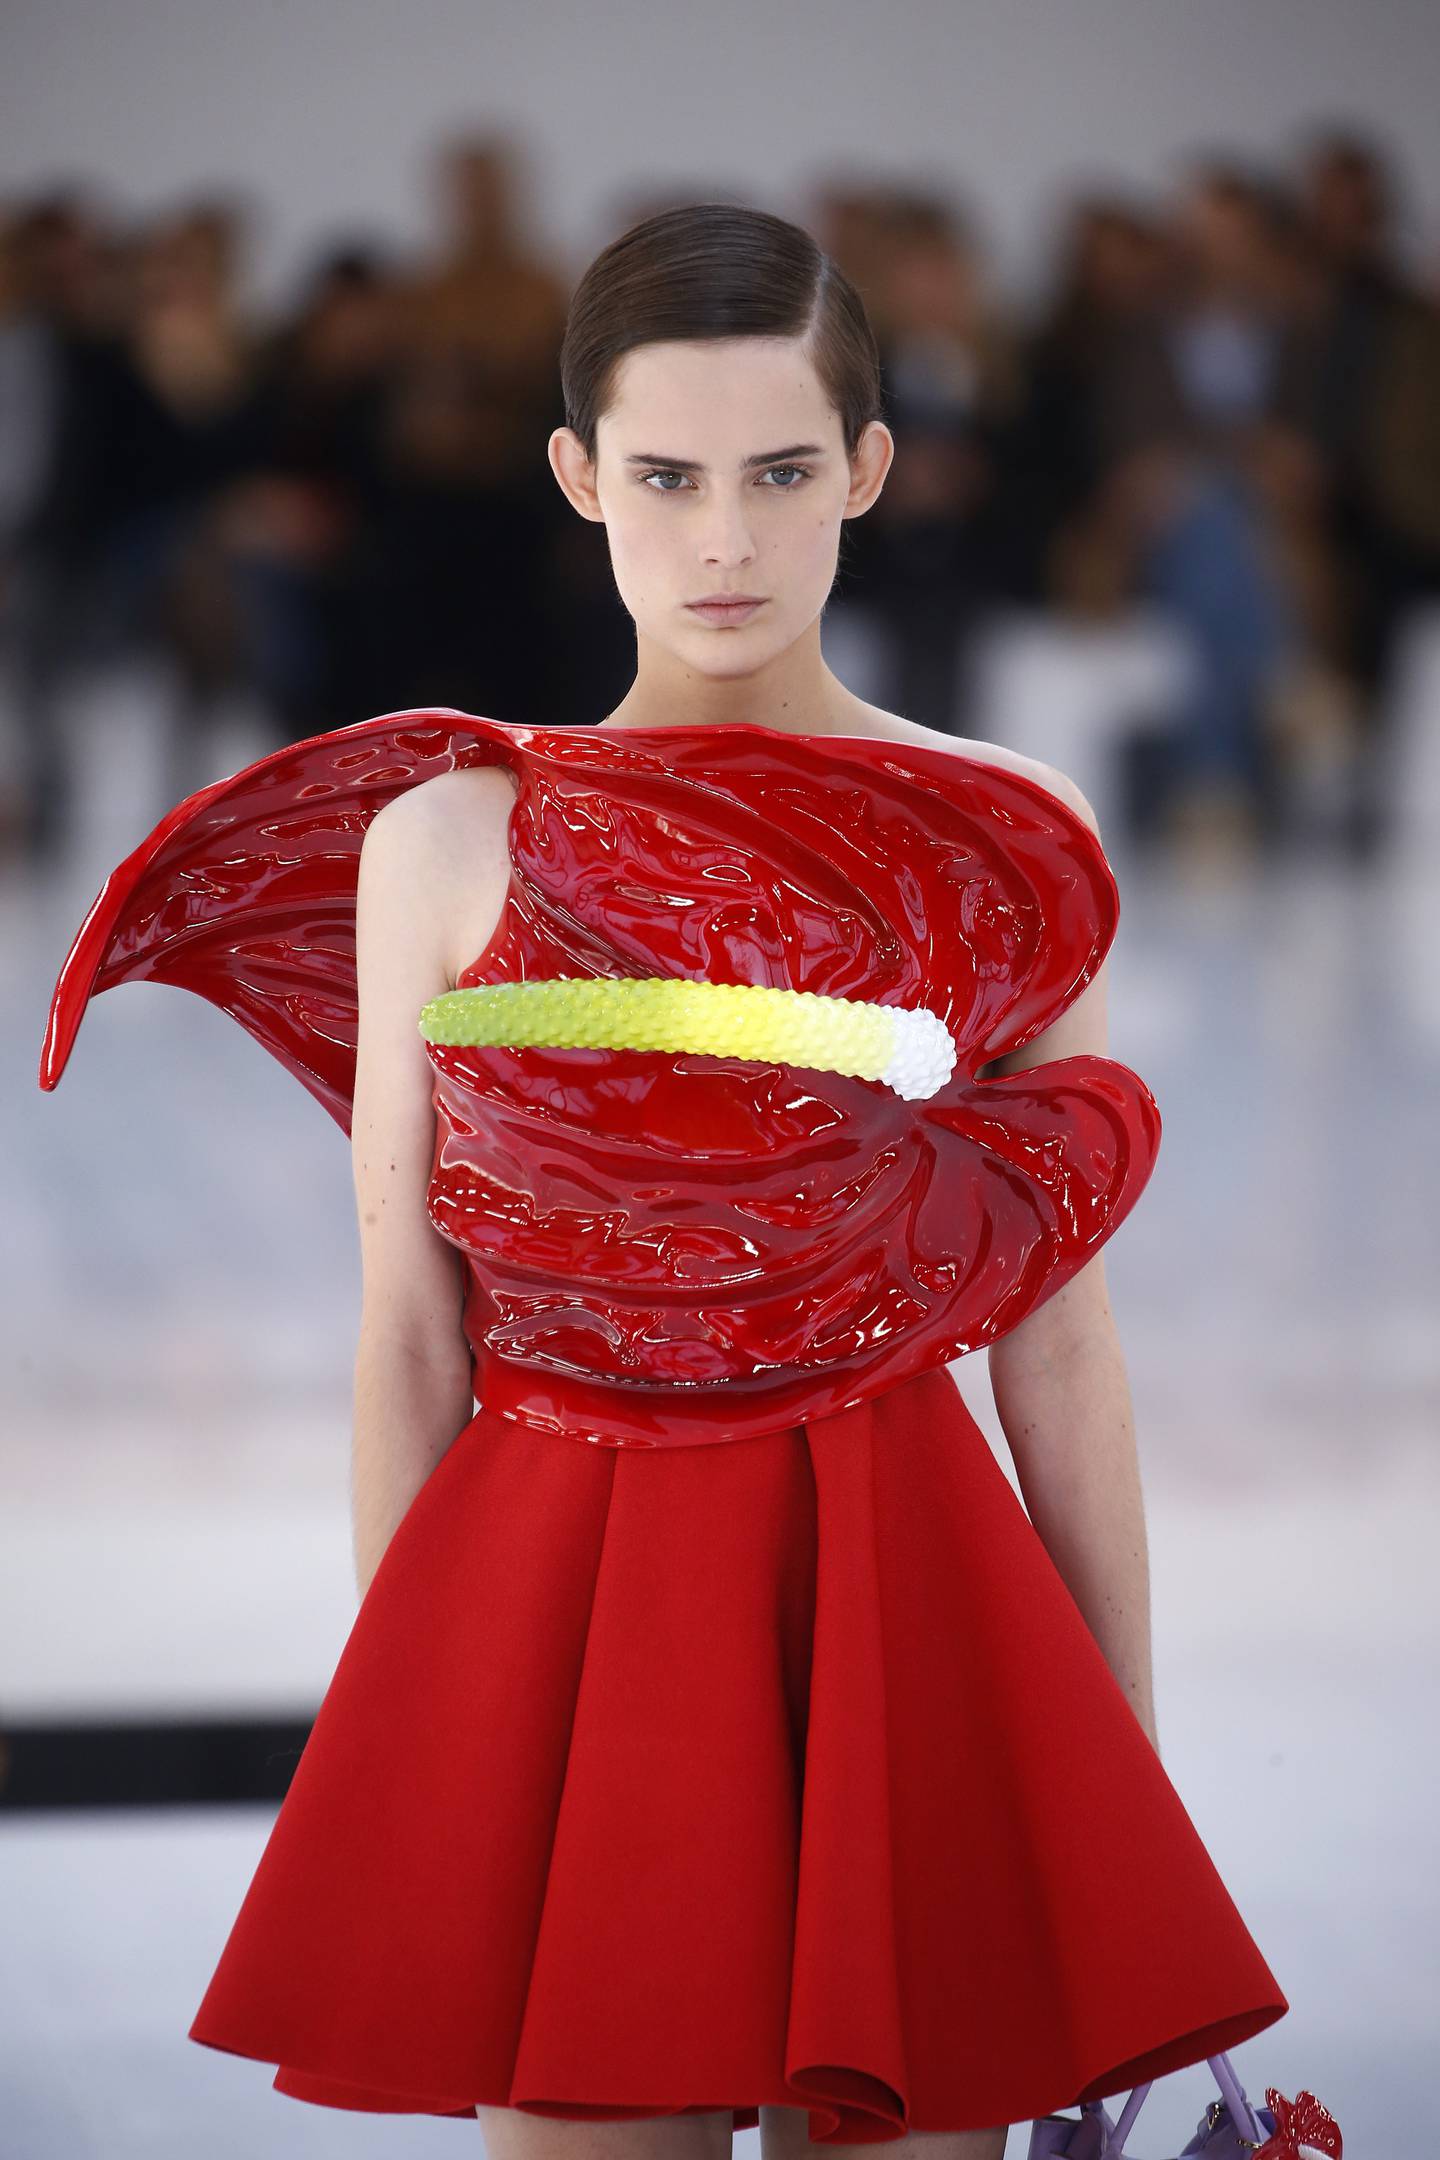 The strange form of the anthurium flower was the theme at the Loewe womenswear spring/summer 2023 show. Getty